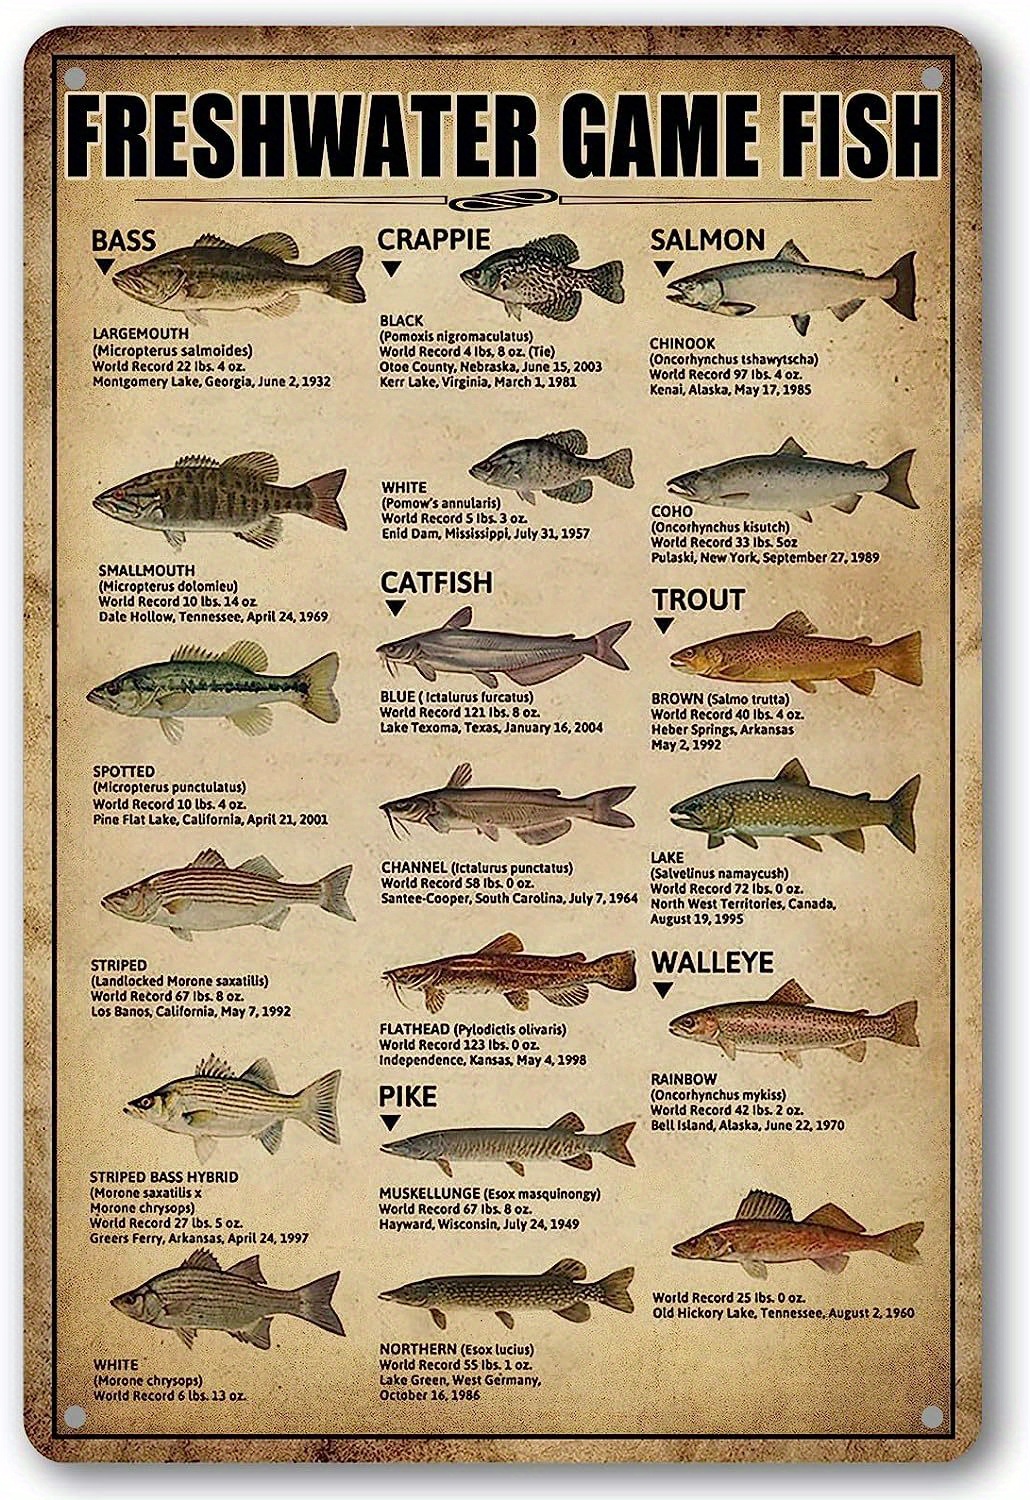 1pc, Freshwater Game Fish Tin Sign Vintage Fishing Wall Decor For Home Fish  Knowledge Metal Signs Rustic Cabin Hunting Decor For Boys Room Bedroom Bat